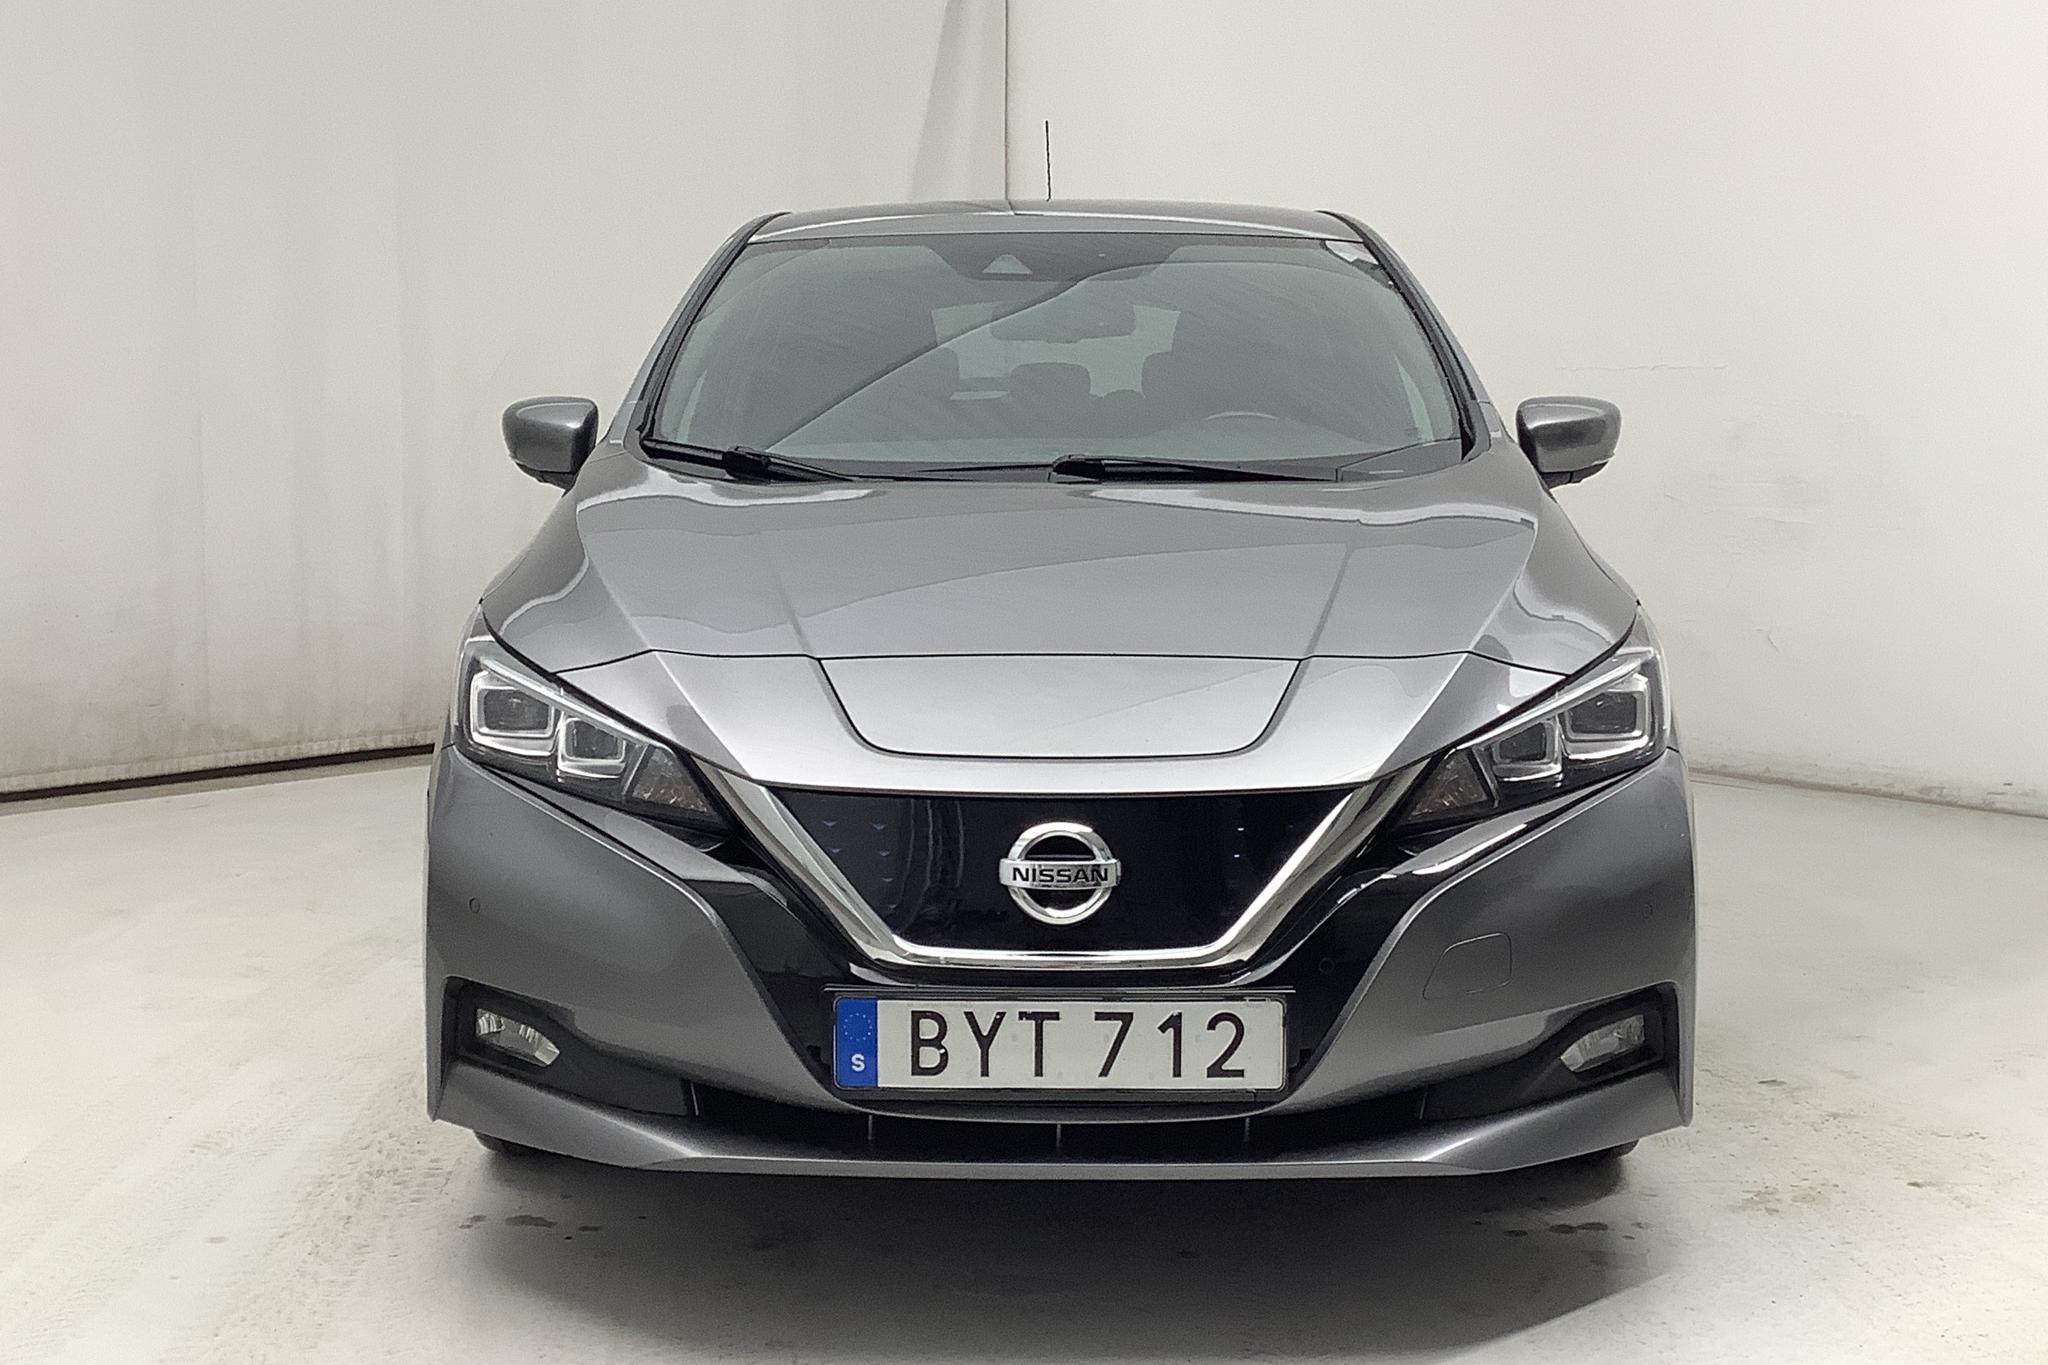 Nissan LEAF 5dr 39 kWh (150hk) - 127 280 km - Automatic - gray - 2018